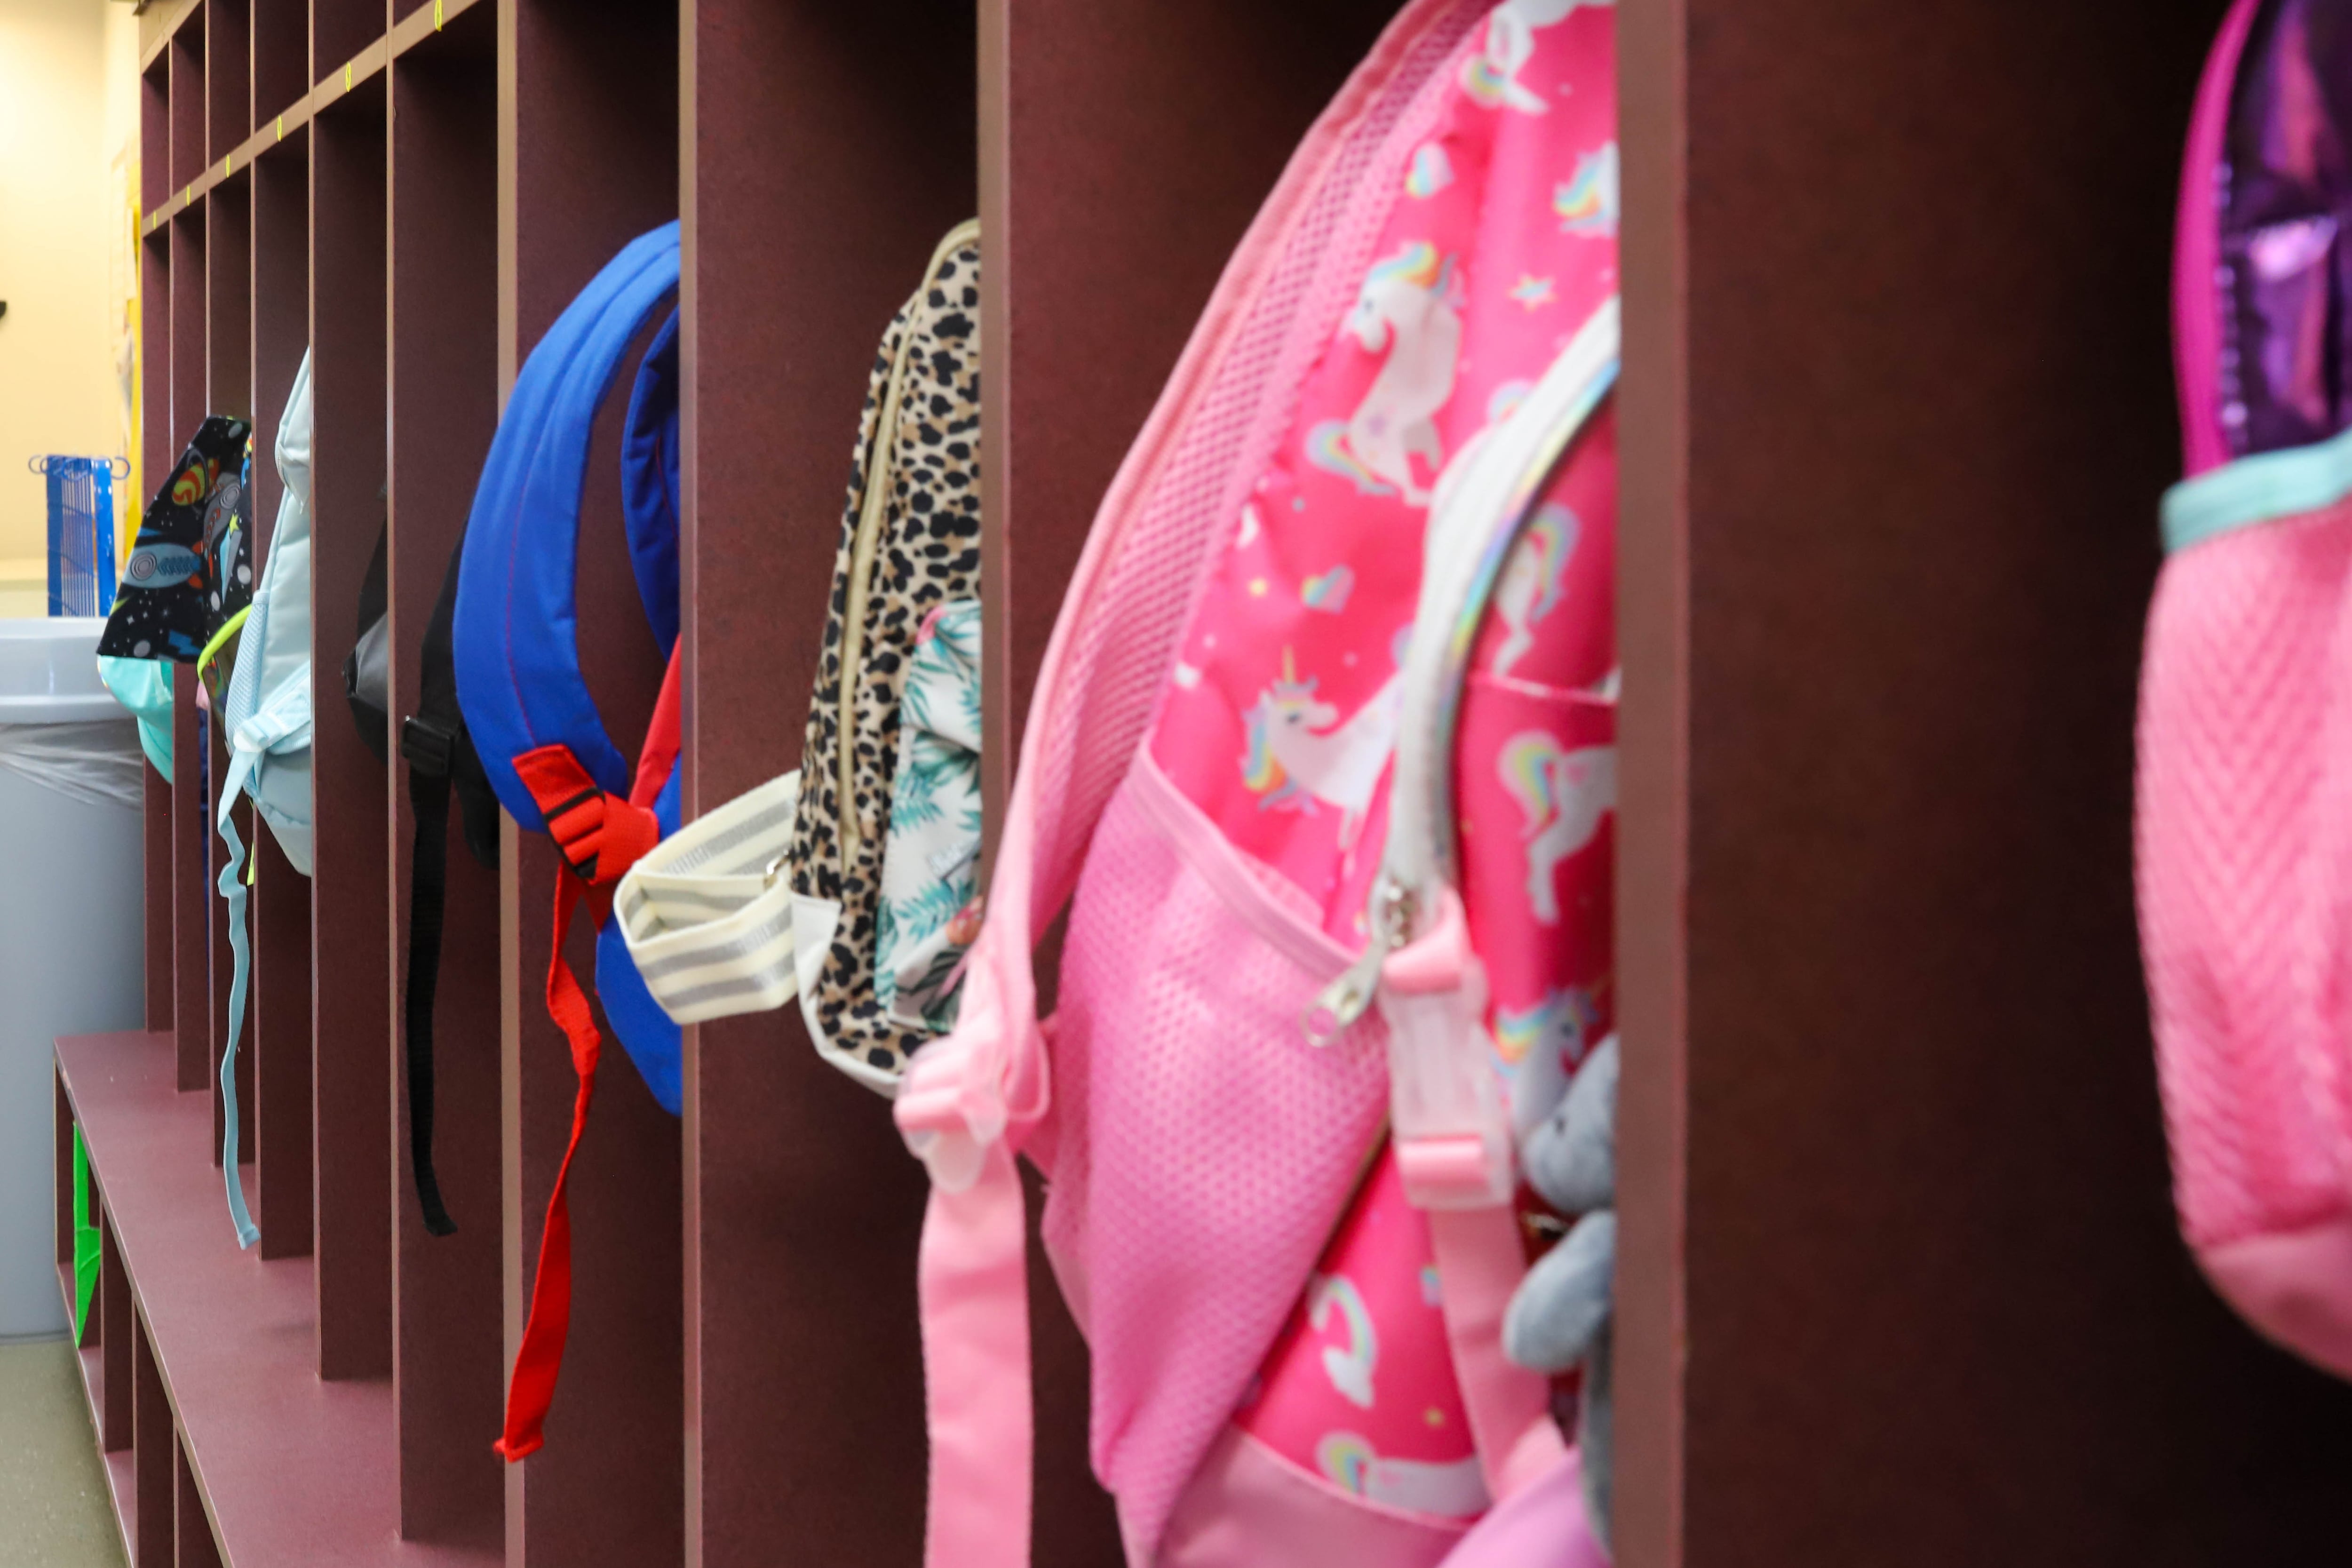 A child’s pink backpack hangs off a coat rack.